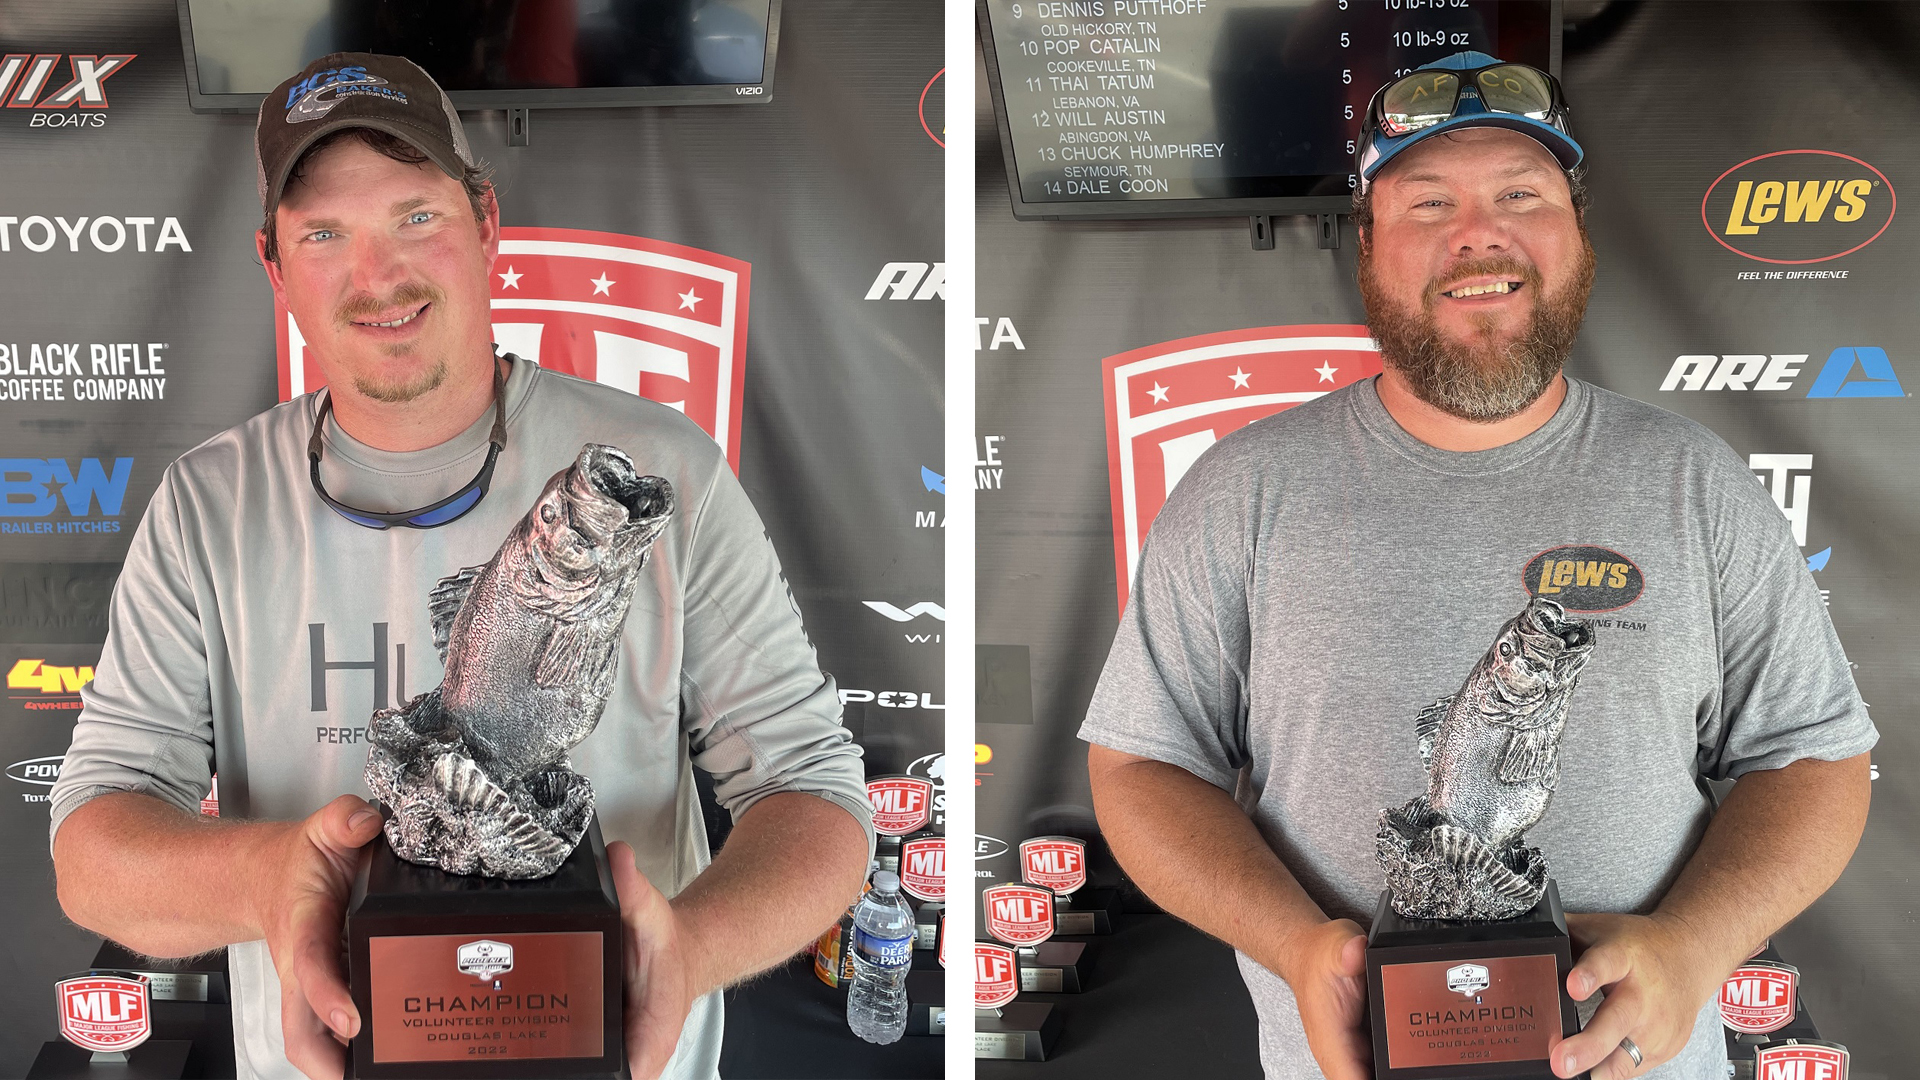 Bluff City's Travis Lilly Earns Victory at Phoenix Bass Fishing League  Event on Douglas Lake - Major League Fishing